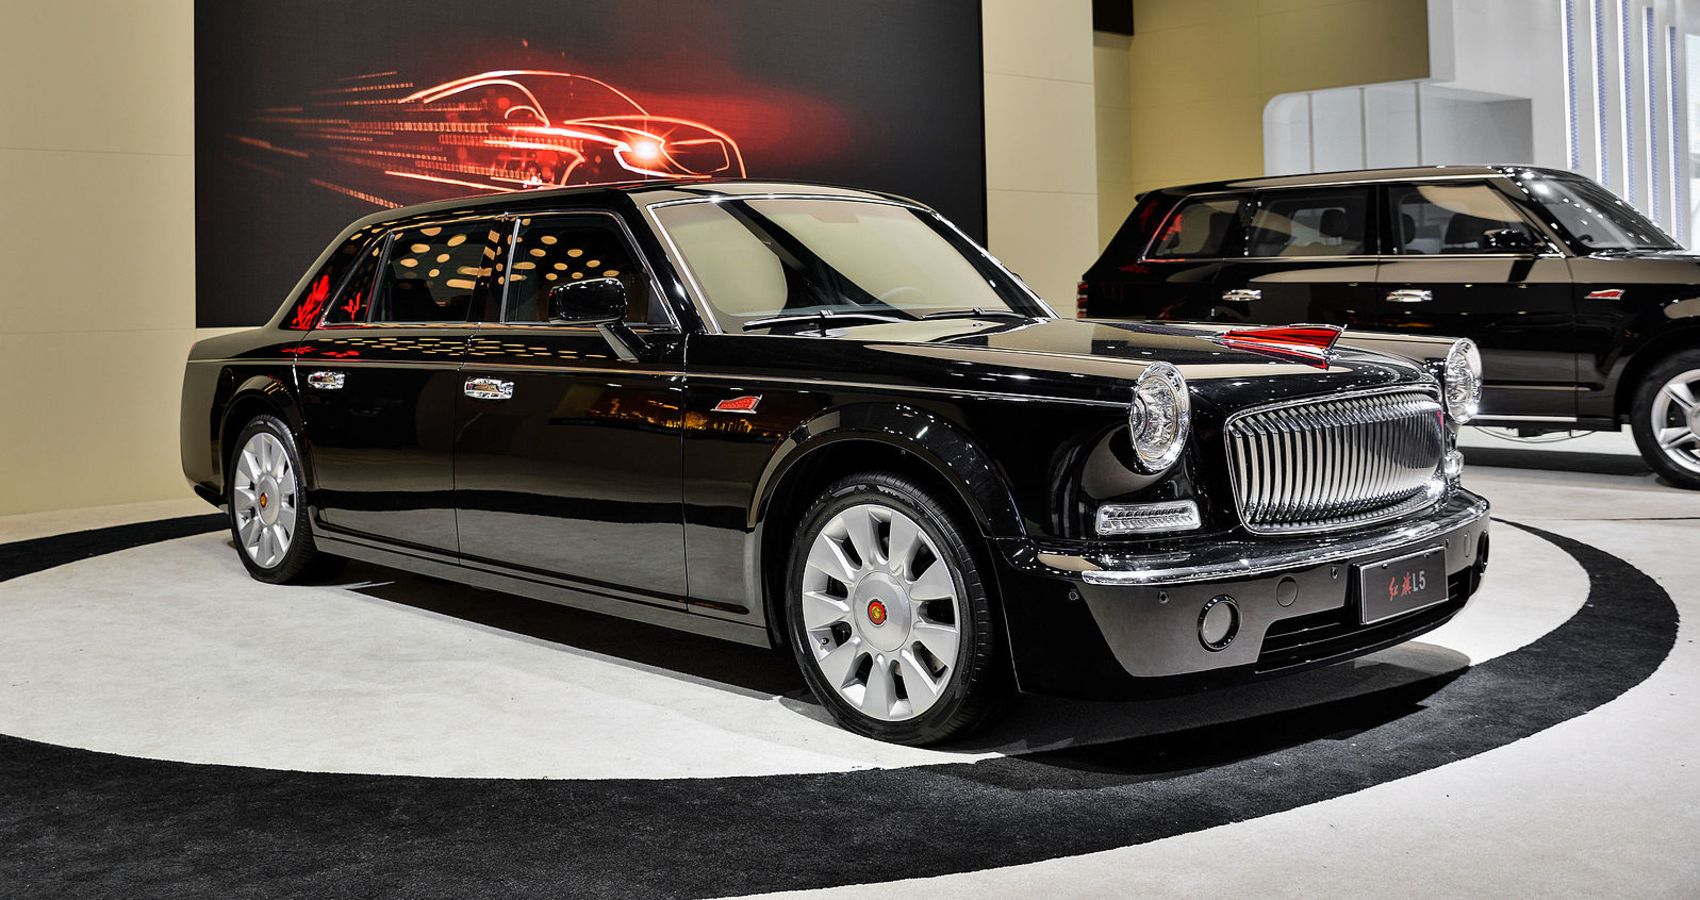 This Is China's Most Luxurious Car Brand